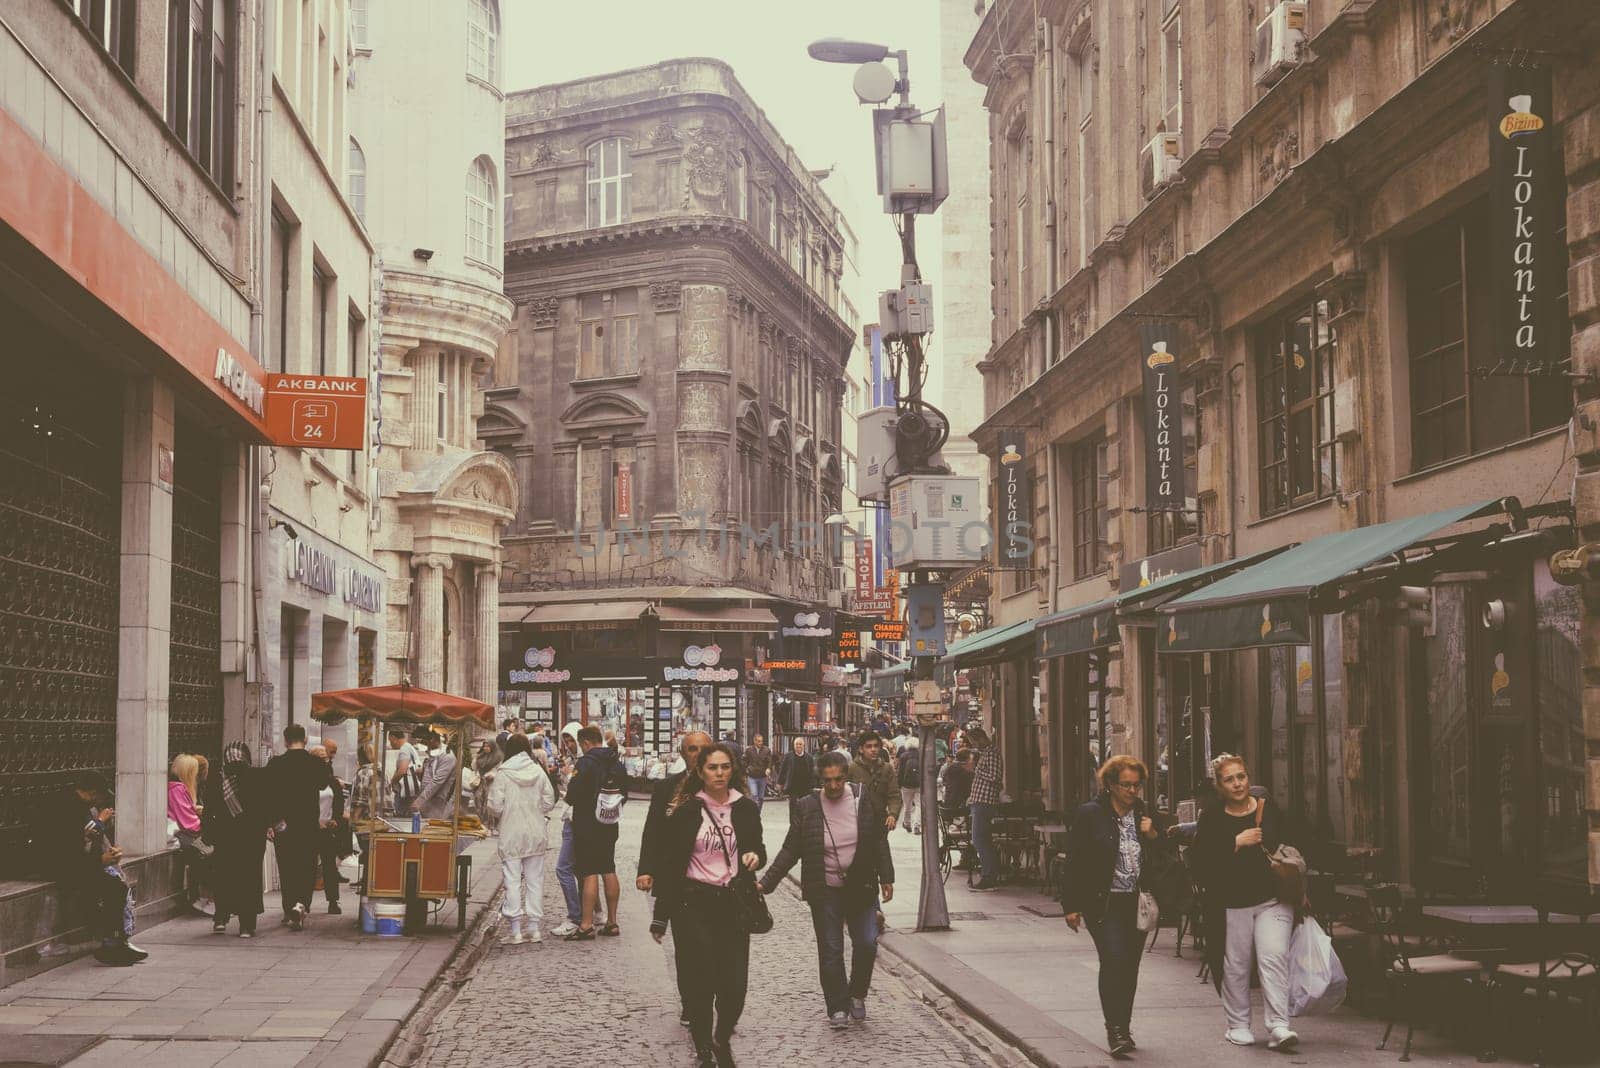 Istanbul, Turkey, May 02, 2023: People walk through the historical streets of Istanbul